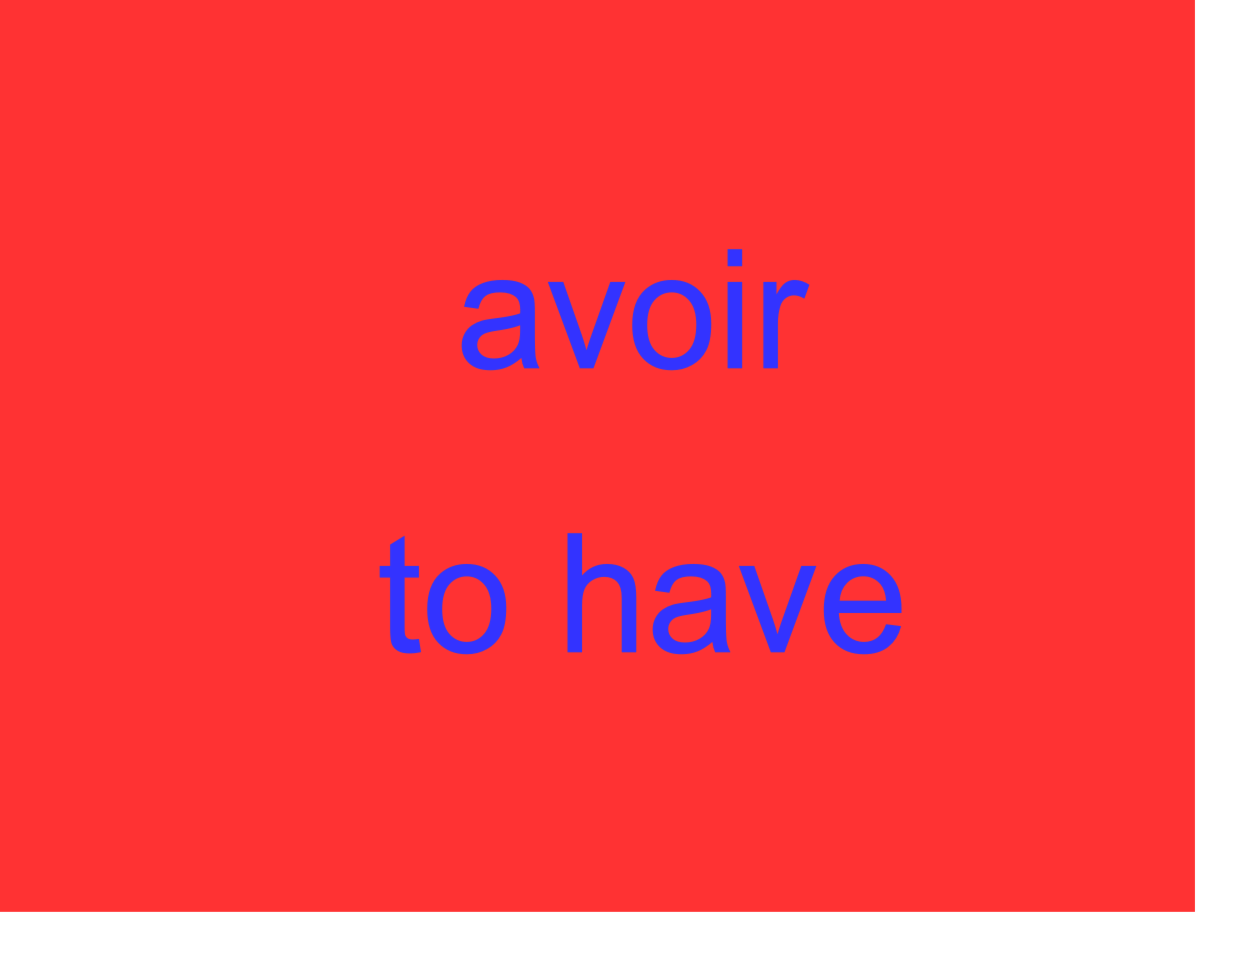 French "avoir" = English "to have" 